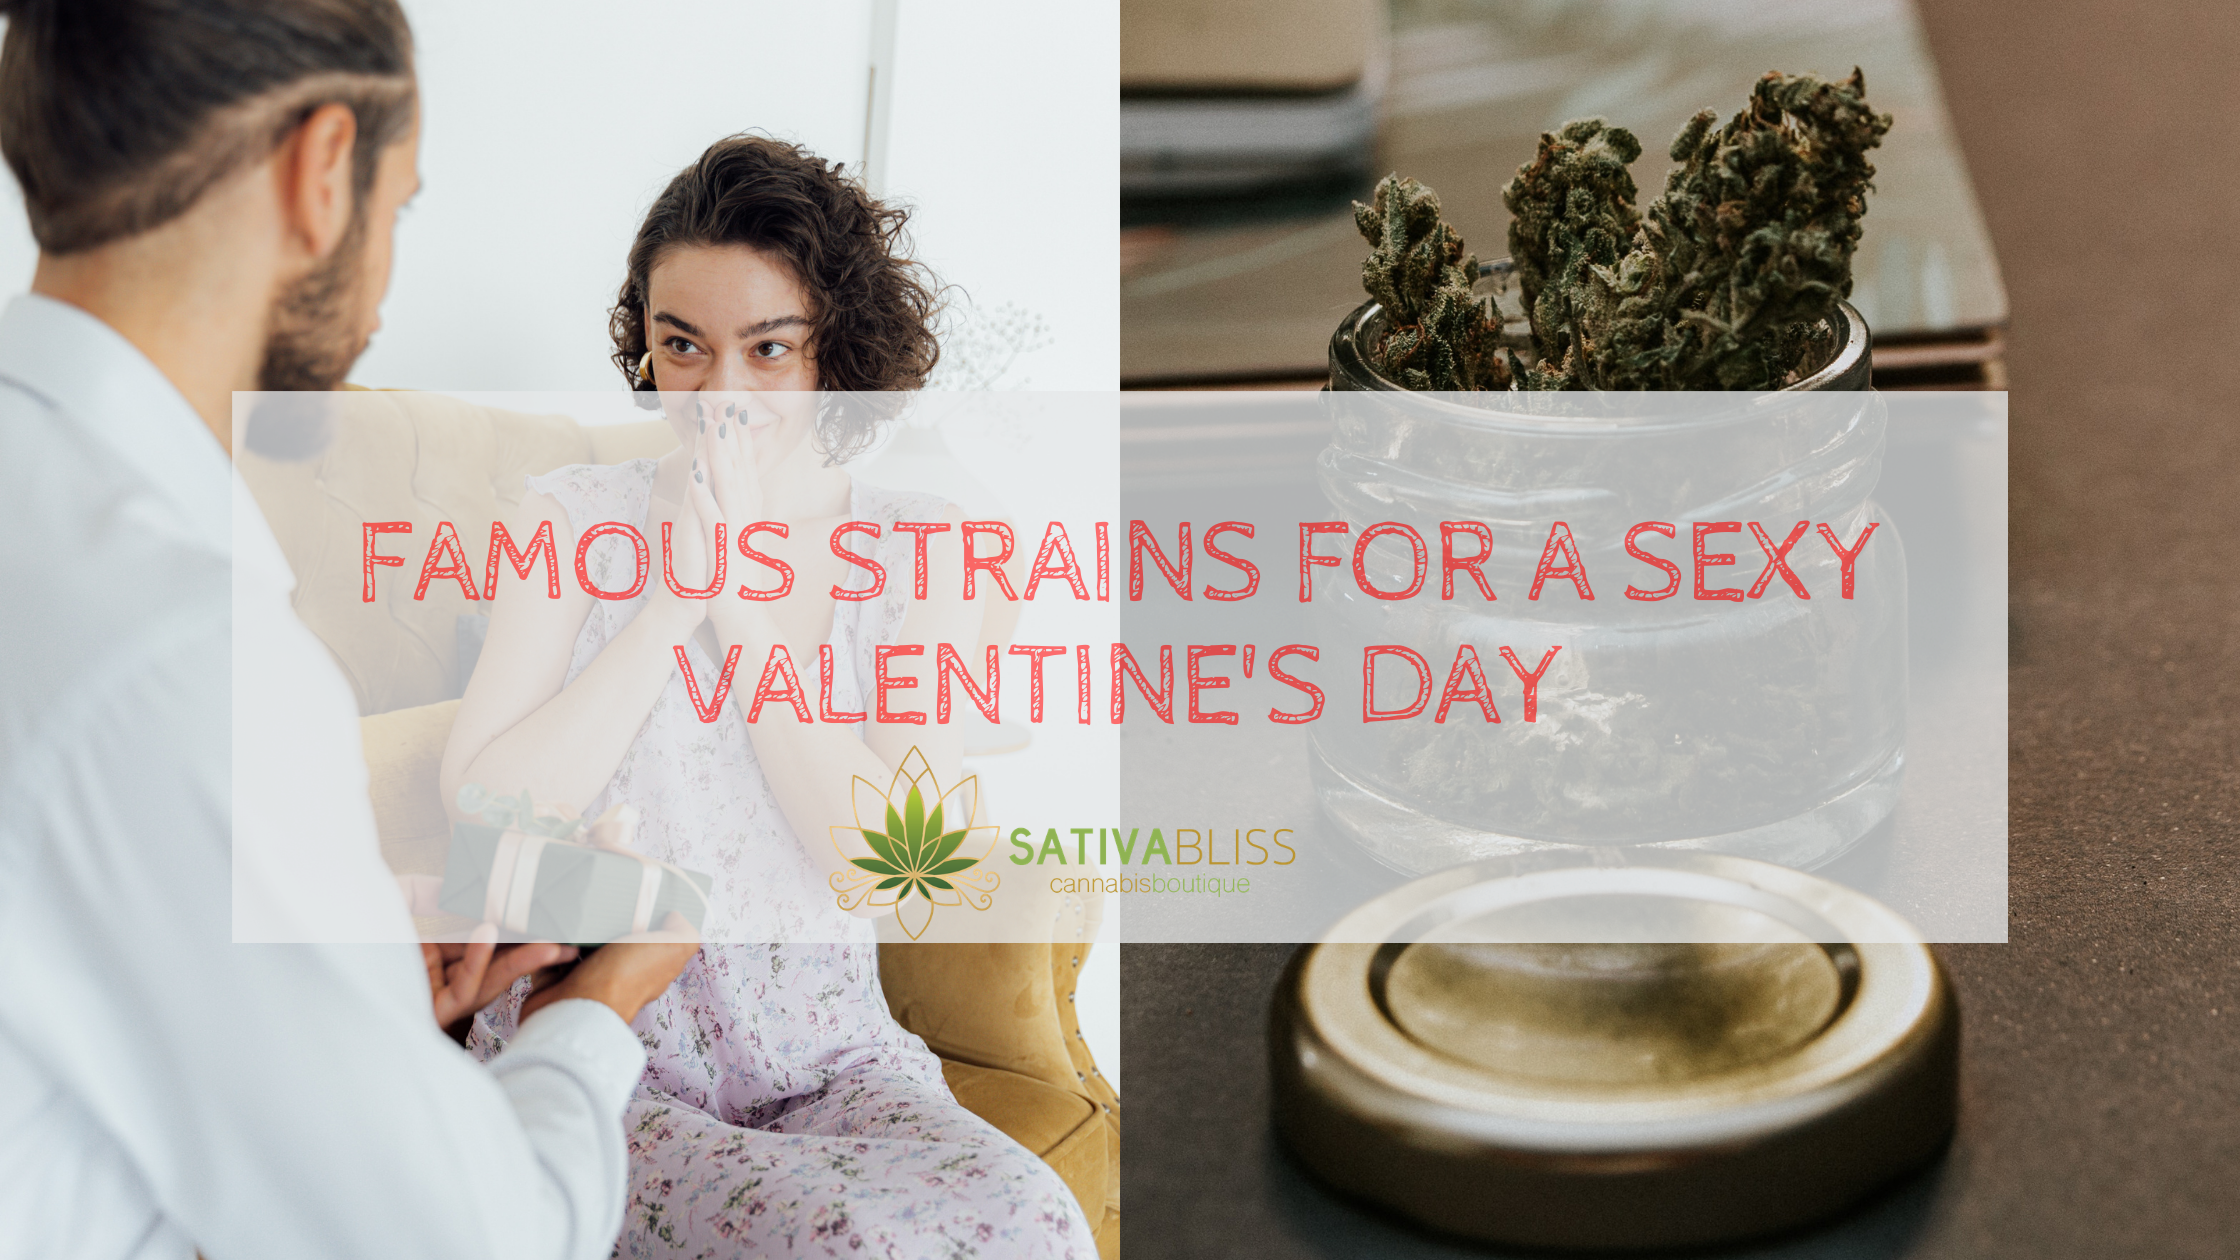 Sativa Bliss Features the Famous Strains for a Sexy Valentine's Day